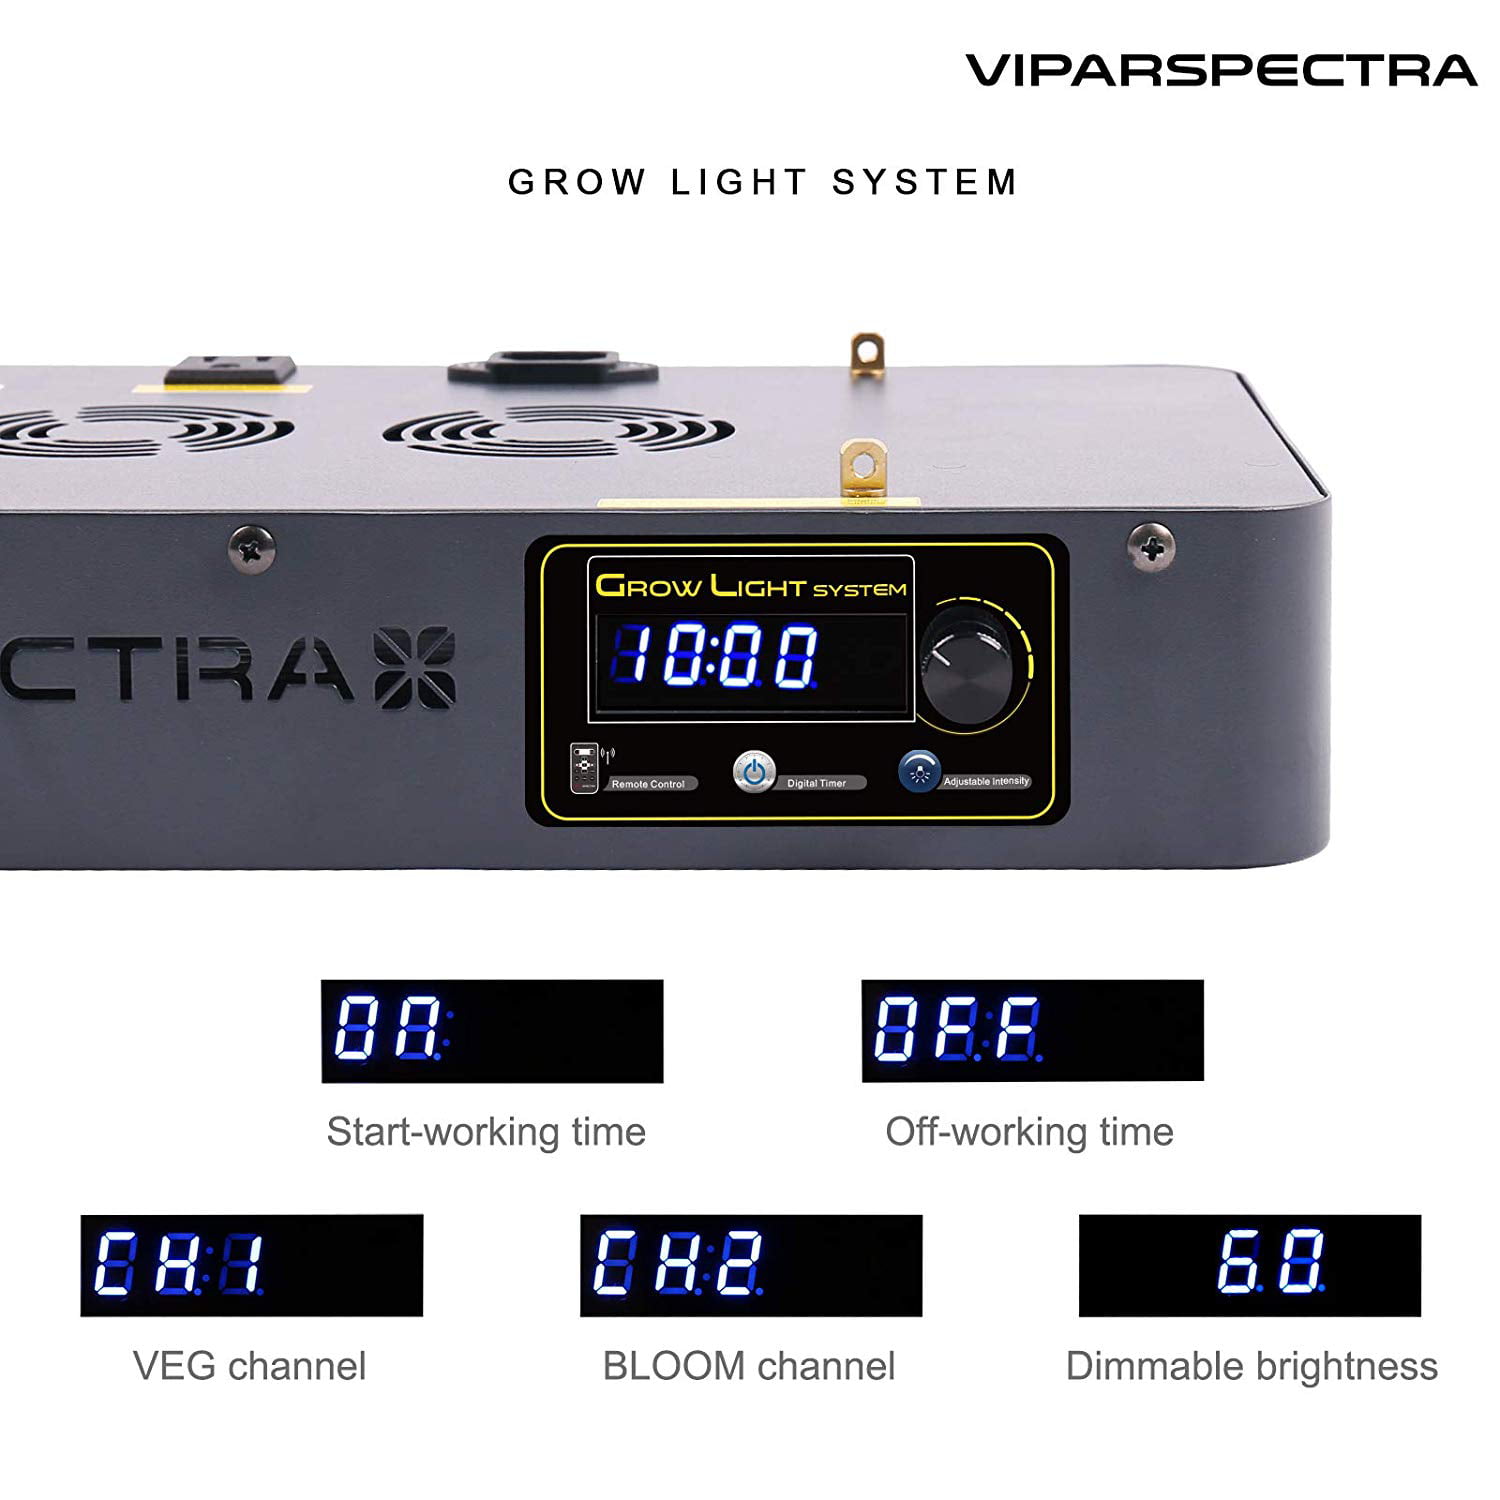 VIPARSPECTRA Timer Control Series VT300 300W LED Grow Light Dimmable Veg/Bloom 